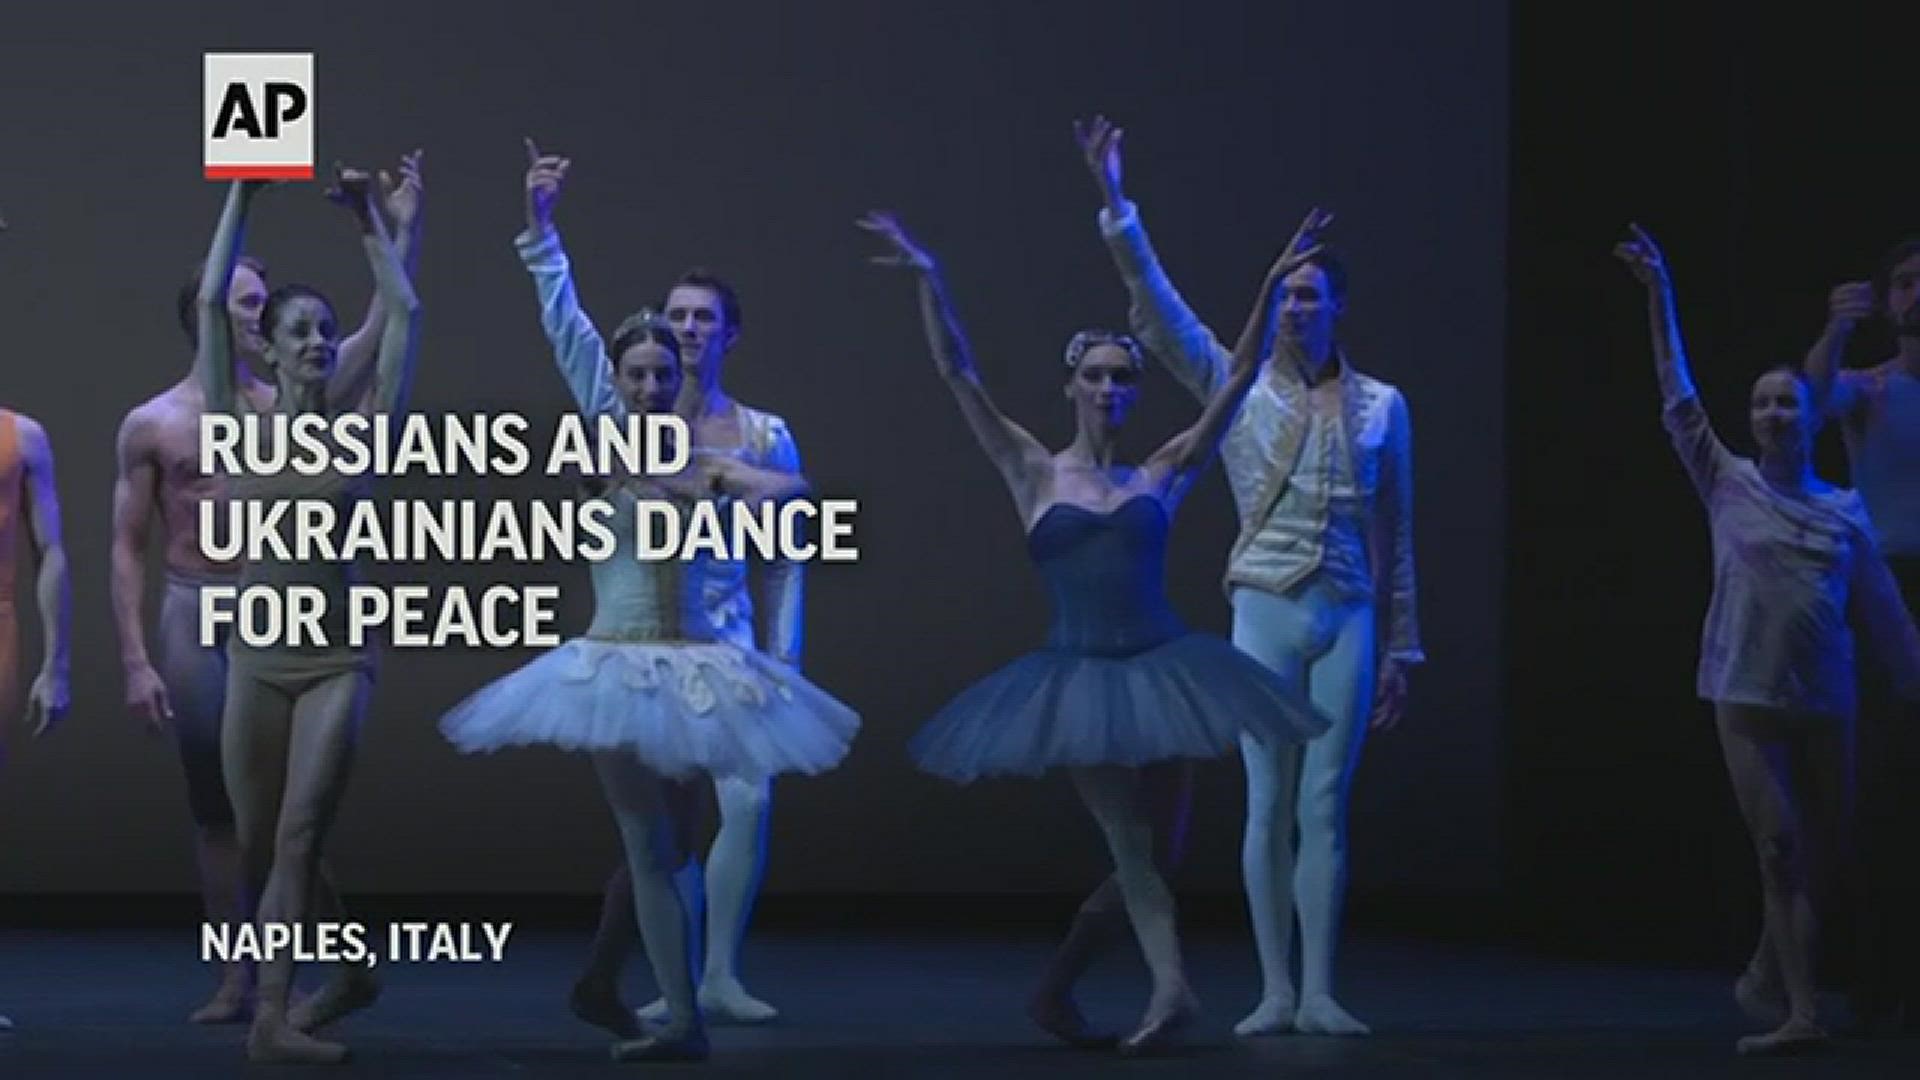 Ukrainian and Russian ballet stars dance together for peace